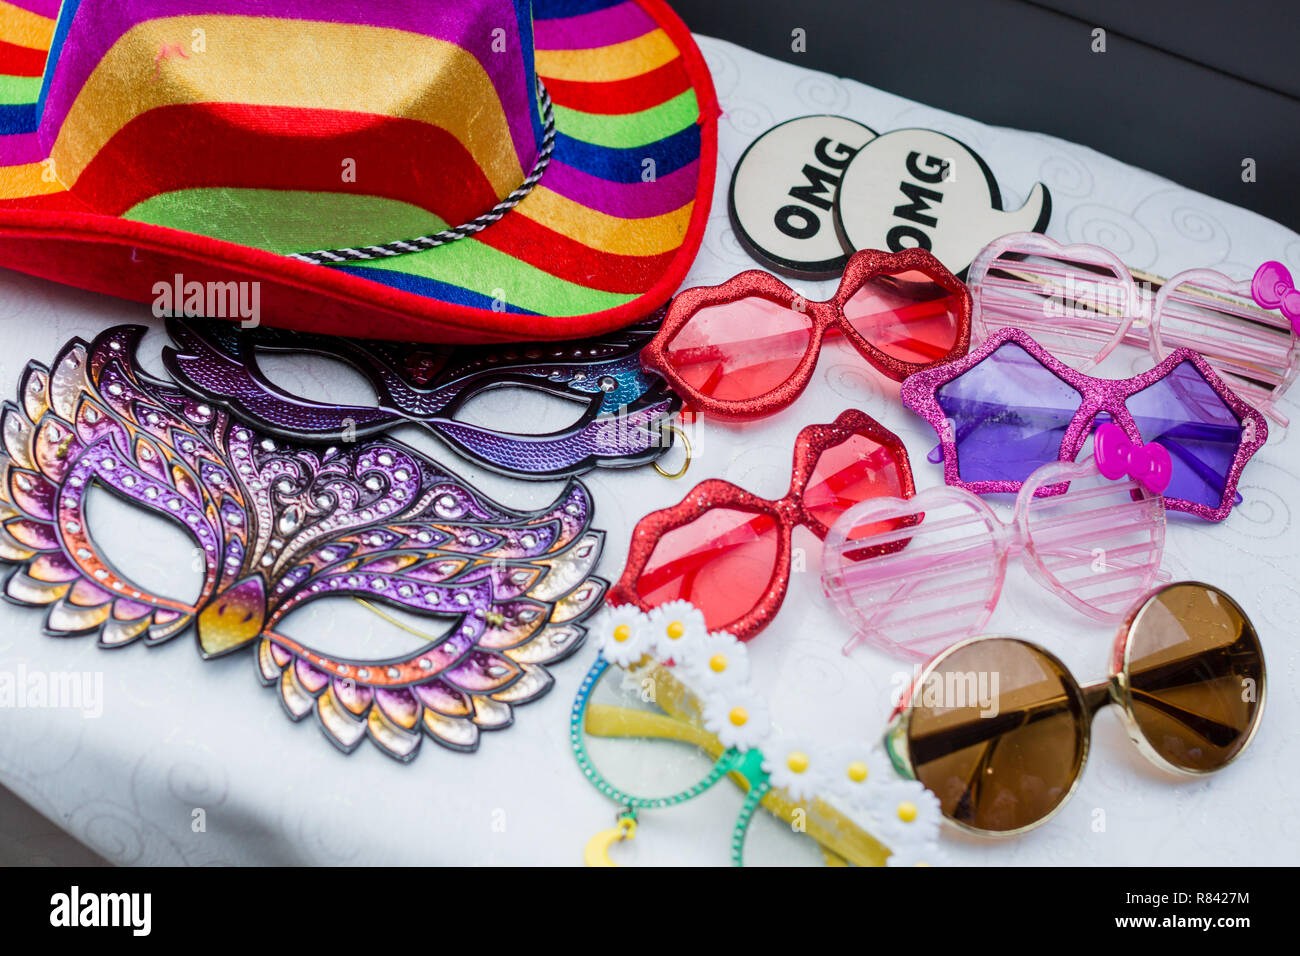 Photo booth props including funny glasses, masks, signs, and colorful hats. Stock Photo